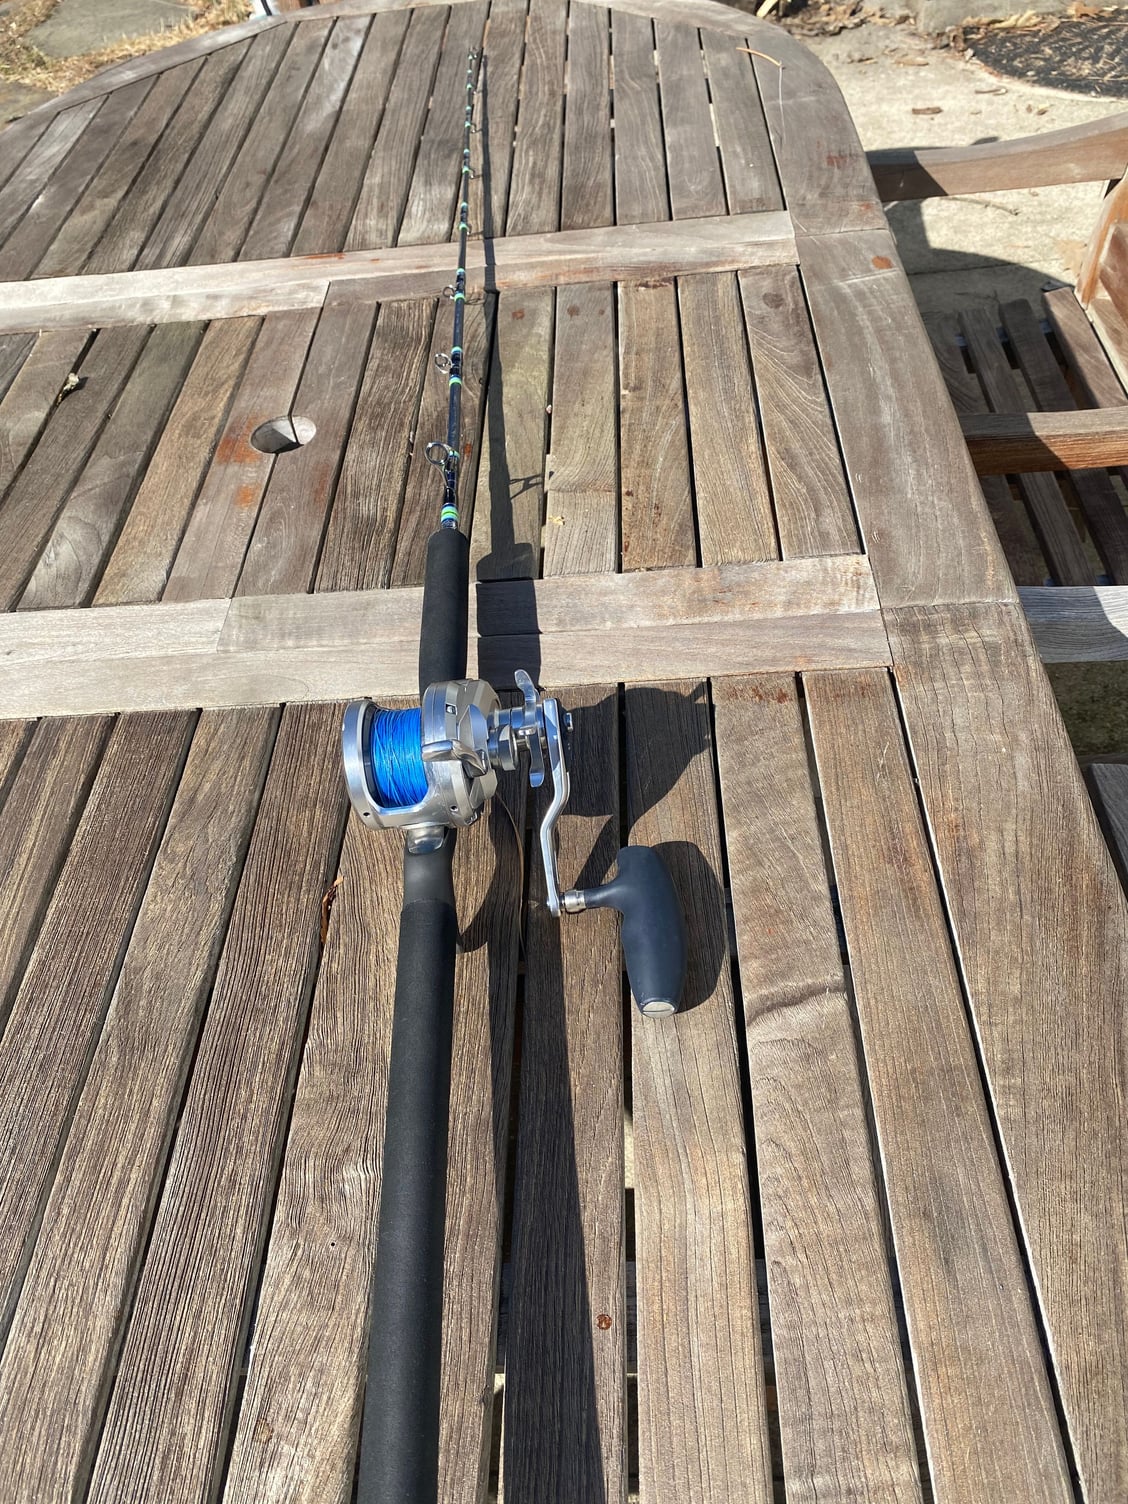 Share Your Rod Builds - Page 3 - The Hull Truth - Boating and Fishing Forum